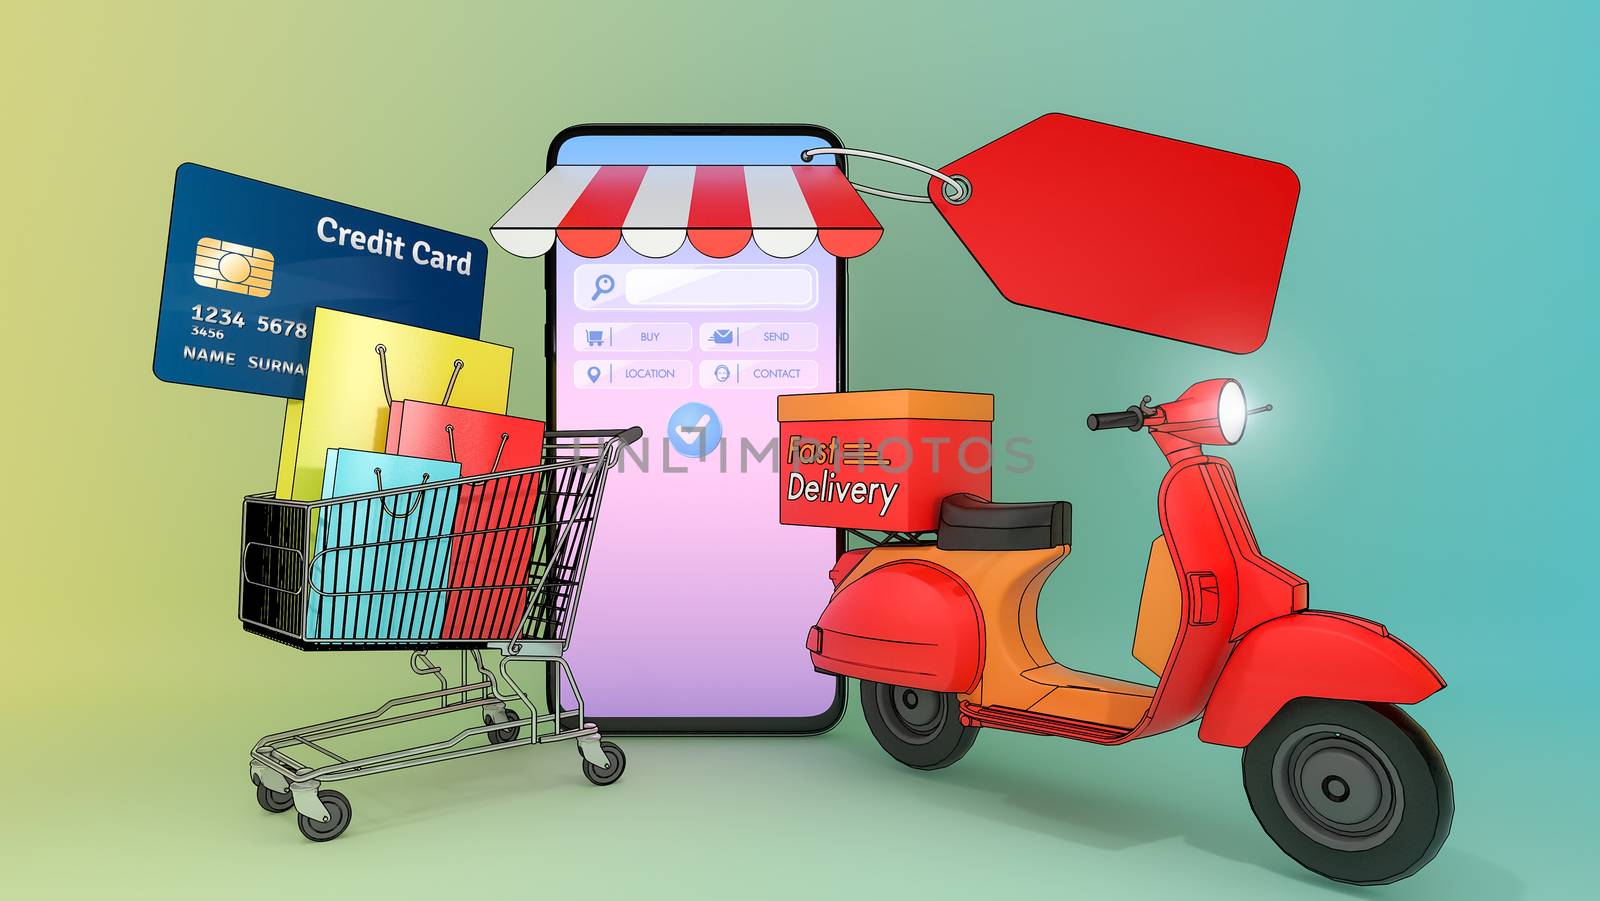 Many Shopping bag and price tag and credit card in a shopping cart with scooter appeared from smartphones screen.,Concept of fast delivery service and Shopping online.,3d illustration with object clipping path.